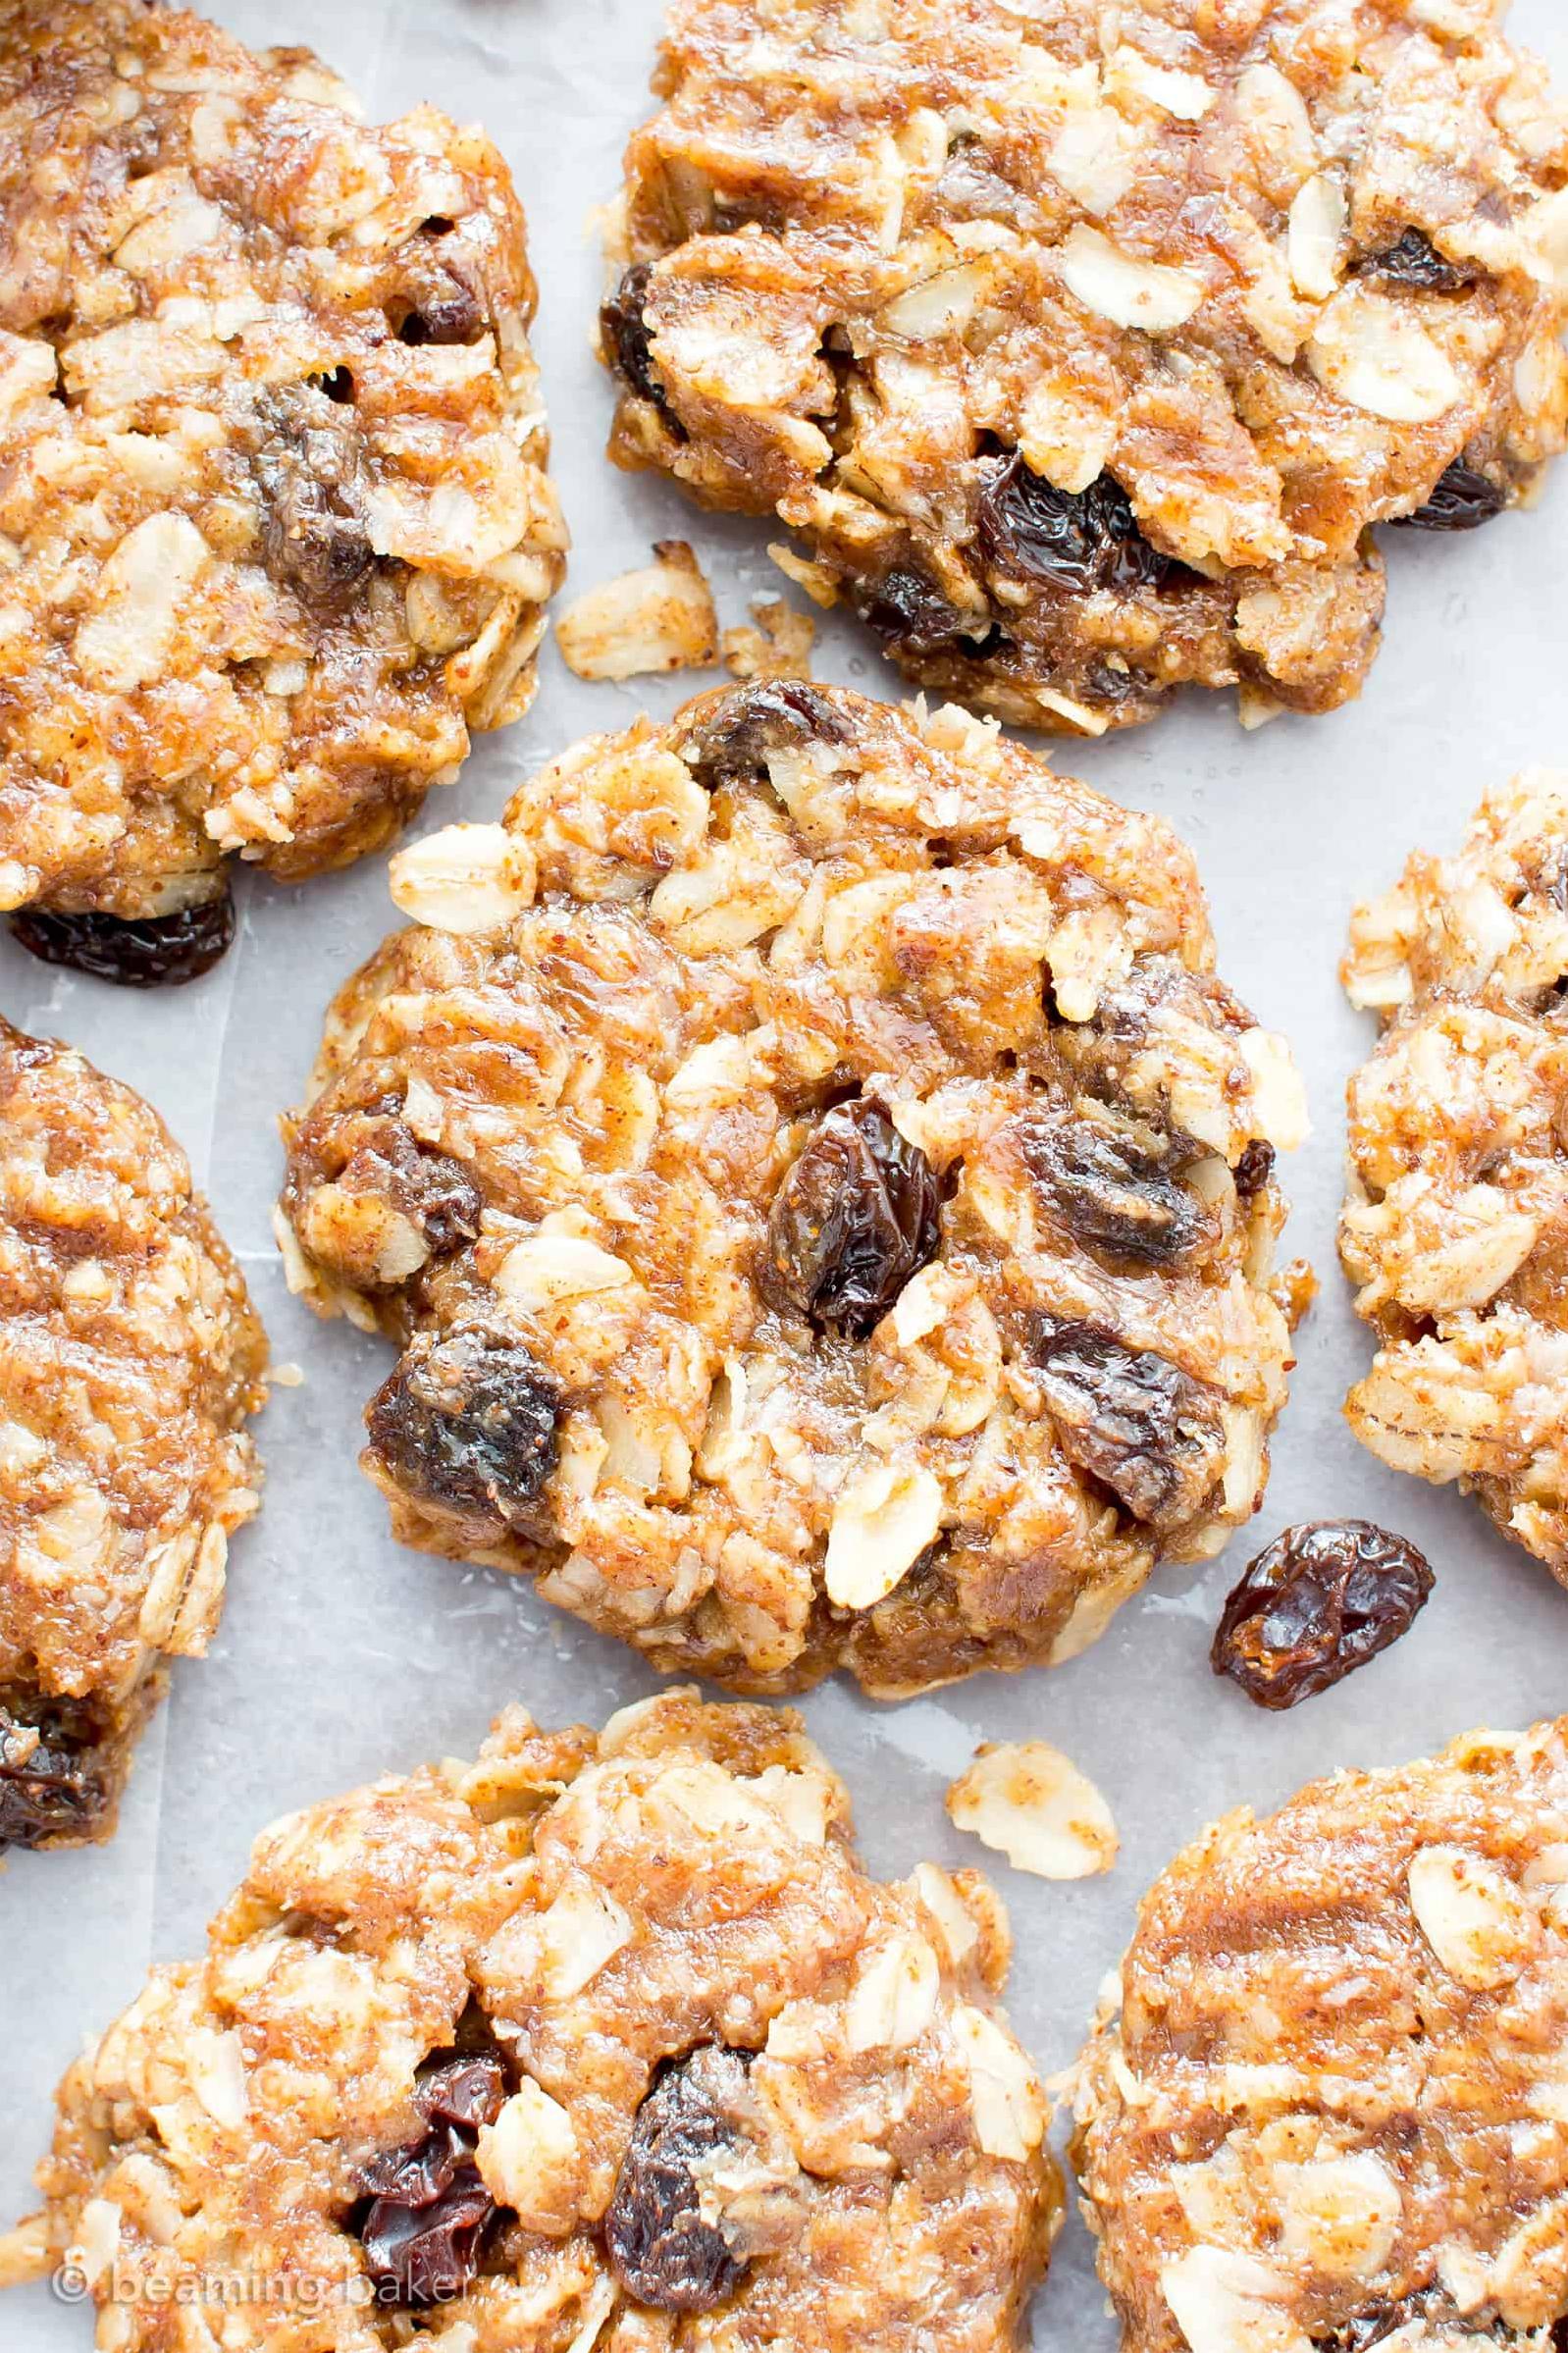  Sink your teeth into these raw raisin oatmeal cookies that are egg-free and dairy-free.